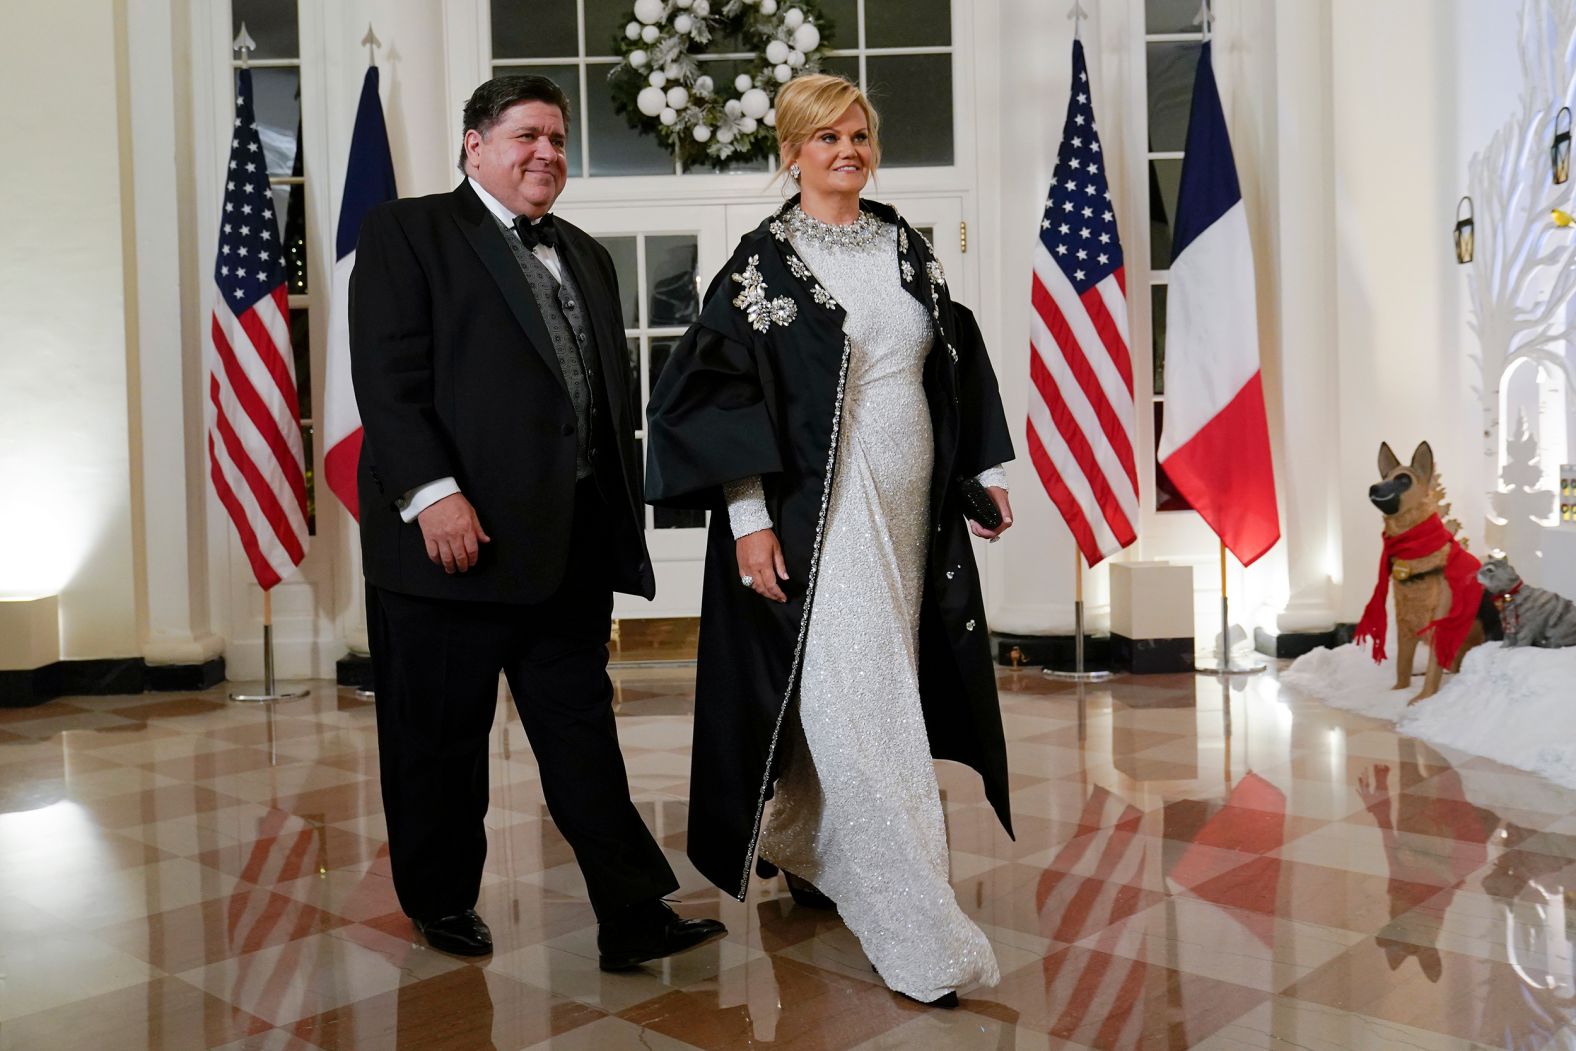 Illinois Gov. J.B. Pritzker arrives with his wife, Mary Kathryn.